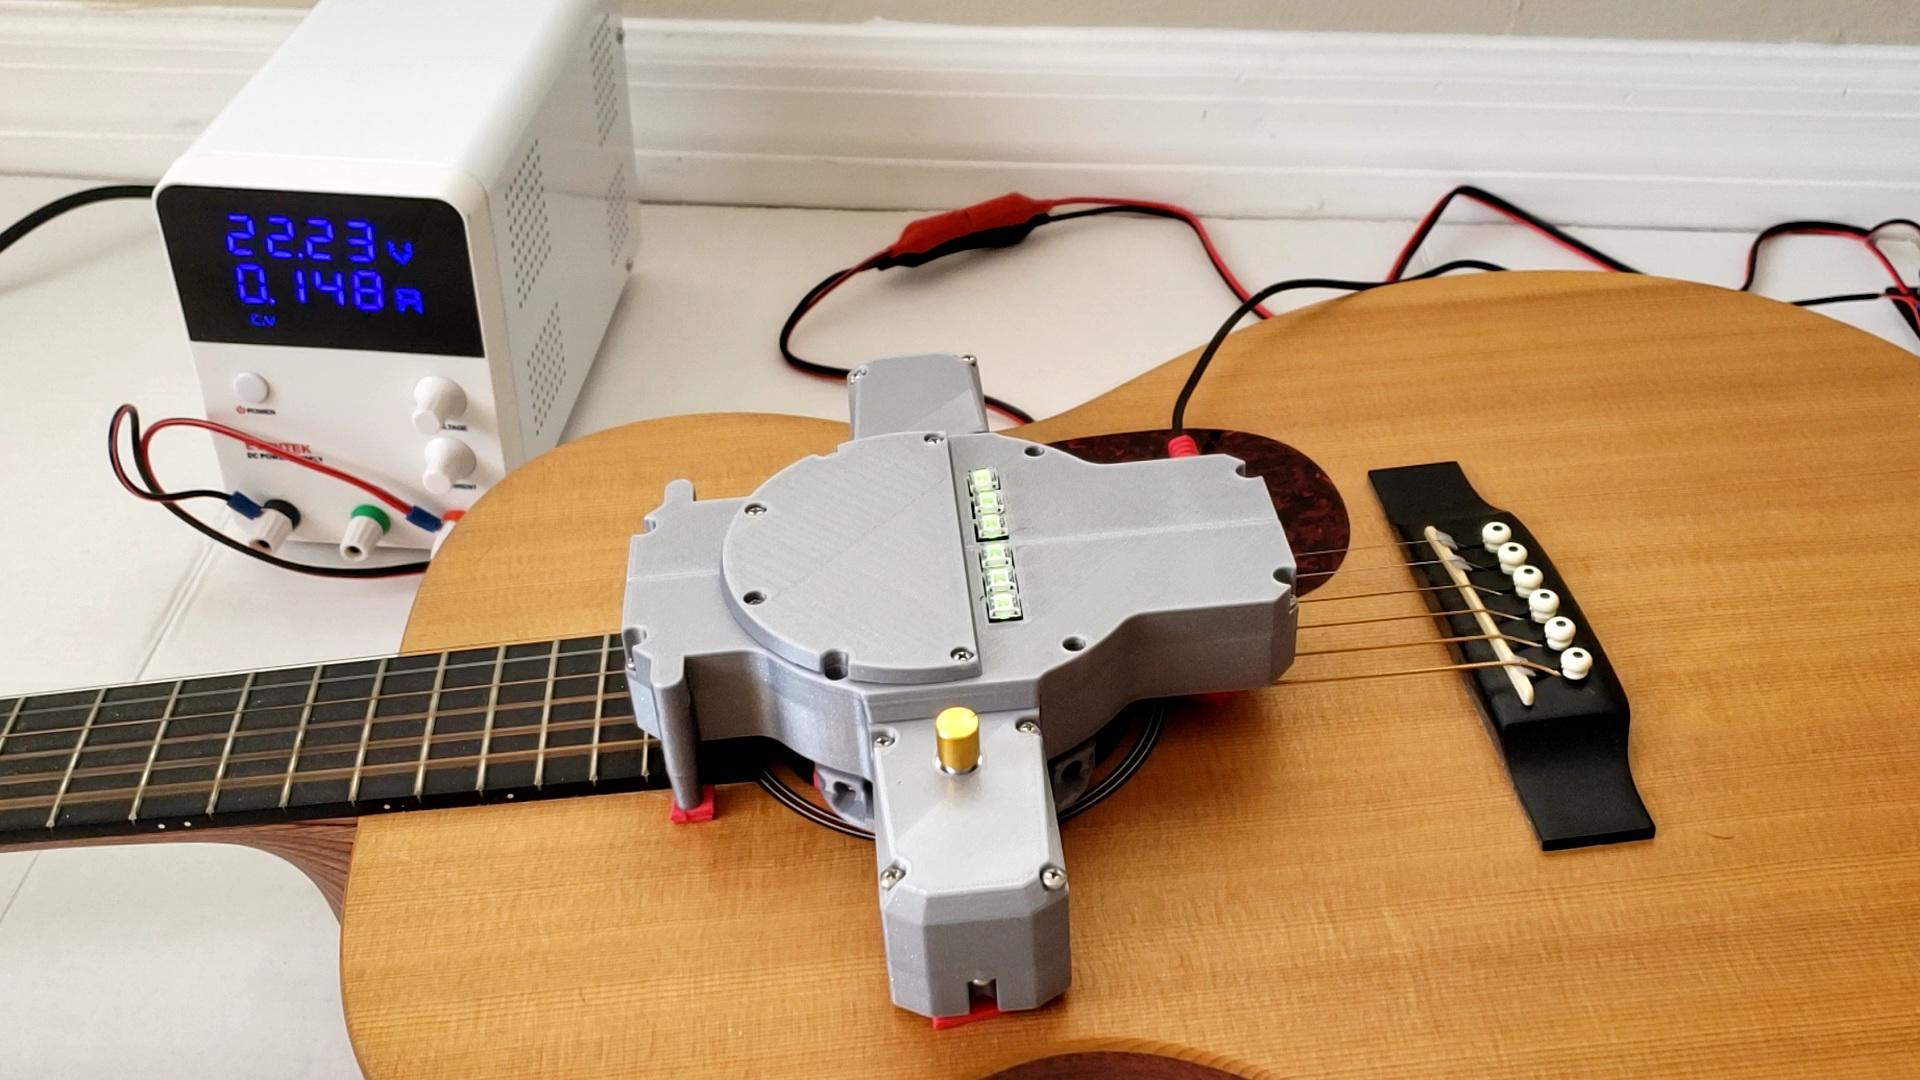 AutoStrummer is a DIY device that strums your guitar for you